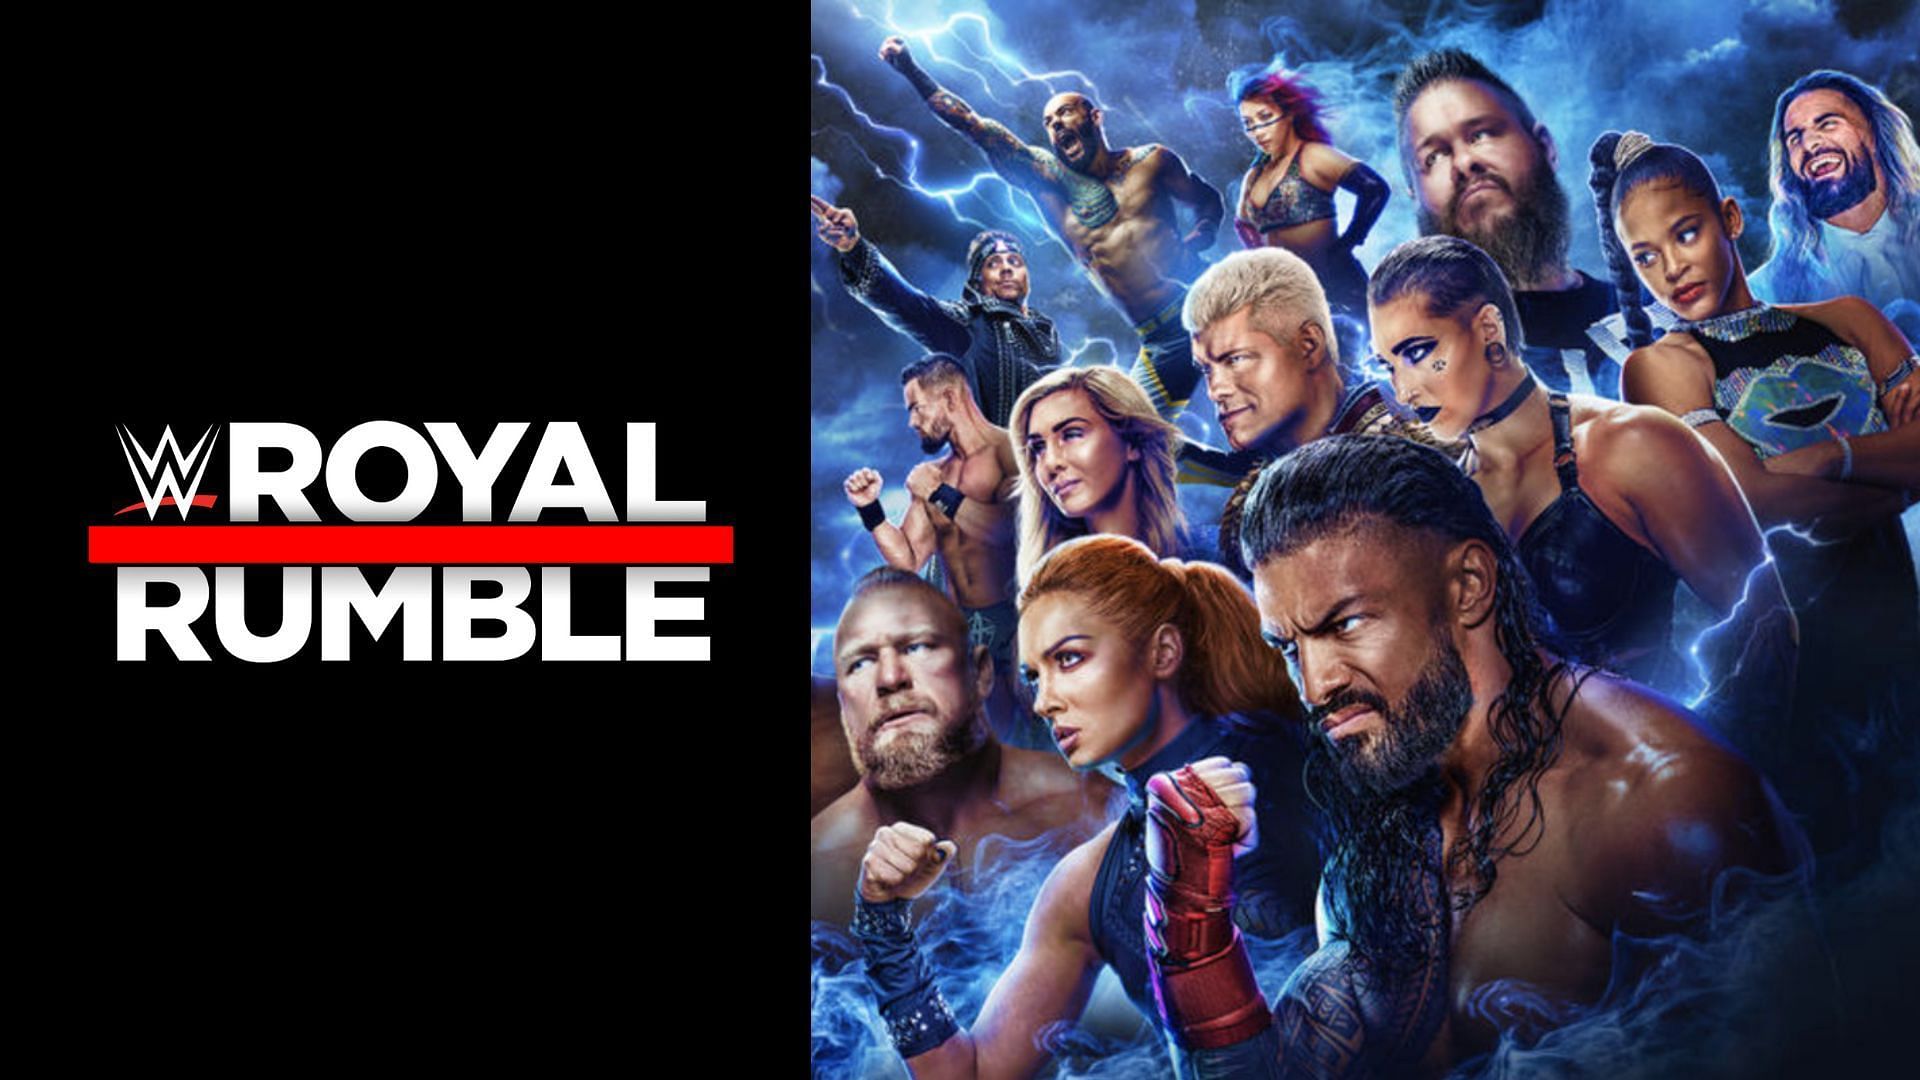 WWE Royal Rumble kicked off the road to WrestleMania on a high-note